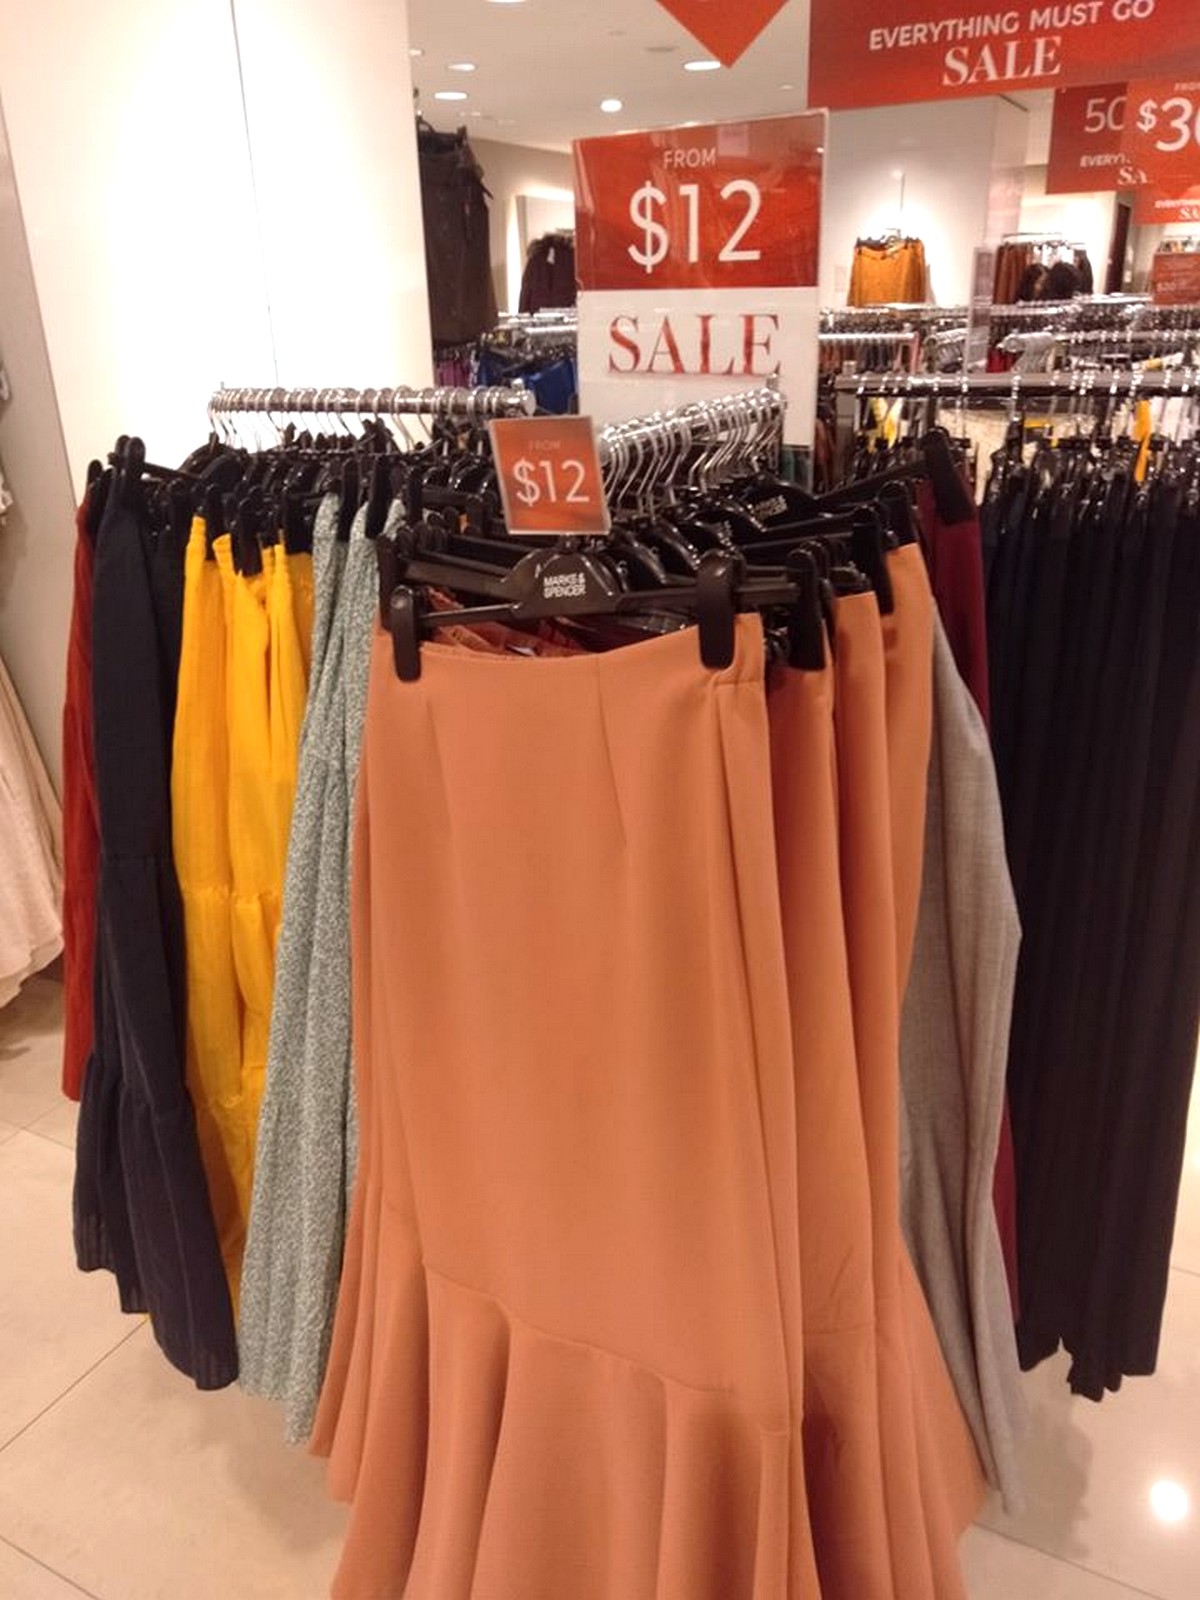 Marks-Spencer-Relocation-Sale-Everything-Must-Go-Clearance-Warehouse-Discounts-2020-Singapore-Plaza-Singapura-2021-0012 Today onwards: Marks & Spencer Relocation Sale! Everything Must Go!